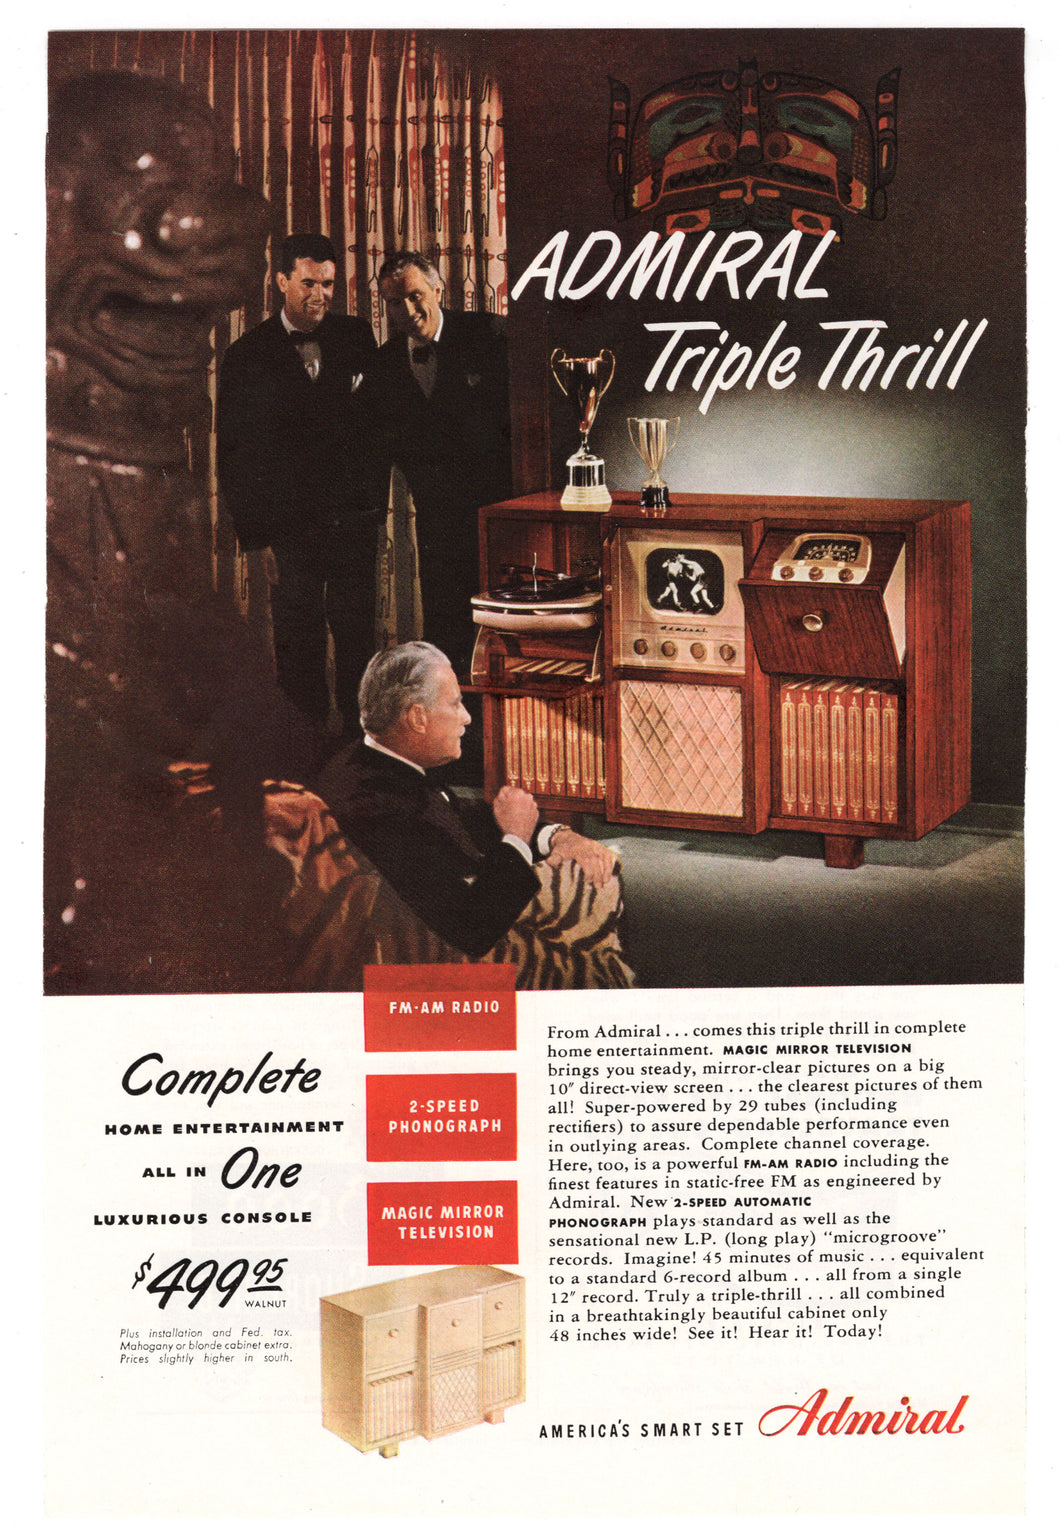 Admiral Complete Home Entertainment - Triple Thrill Vintage Ad - (TV, Radio, Phono) # 135 - 1960's